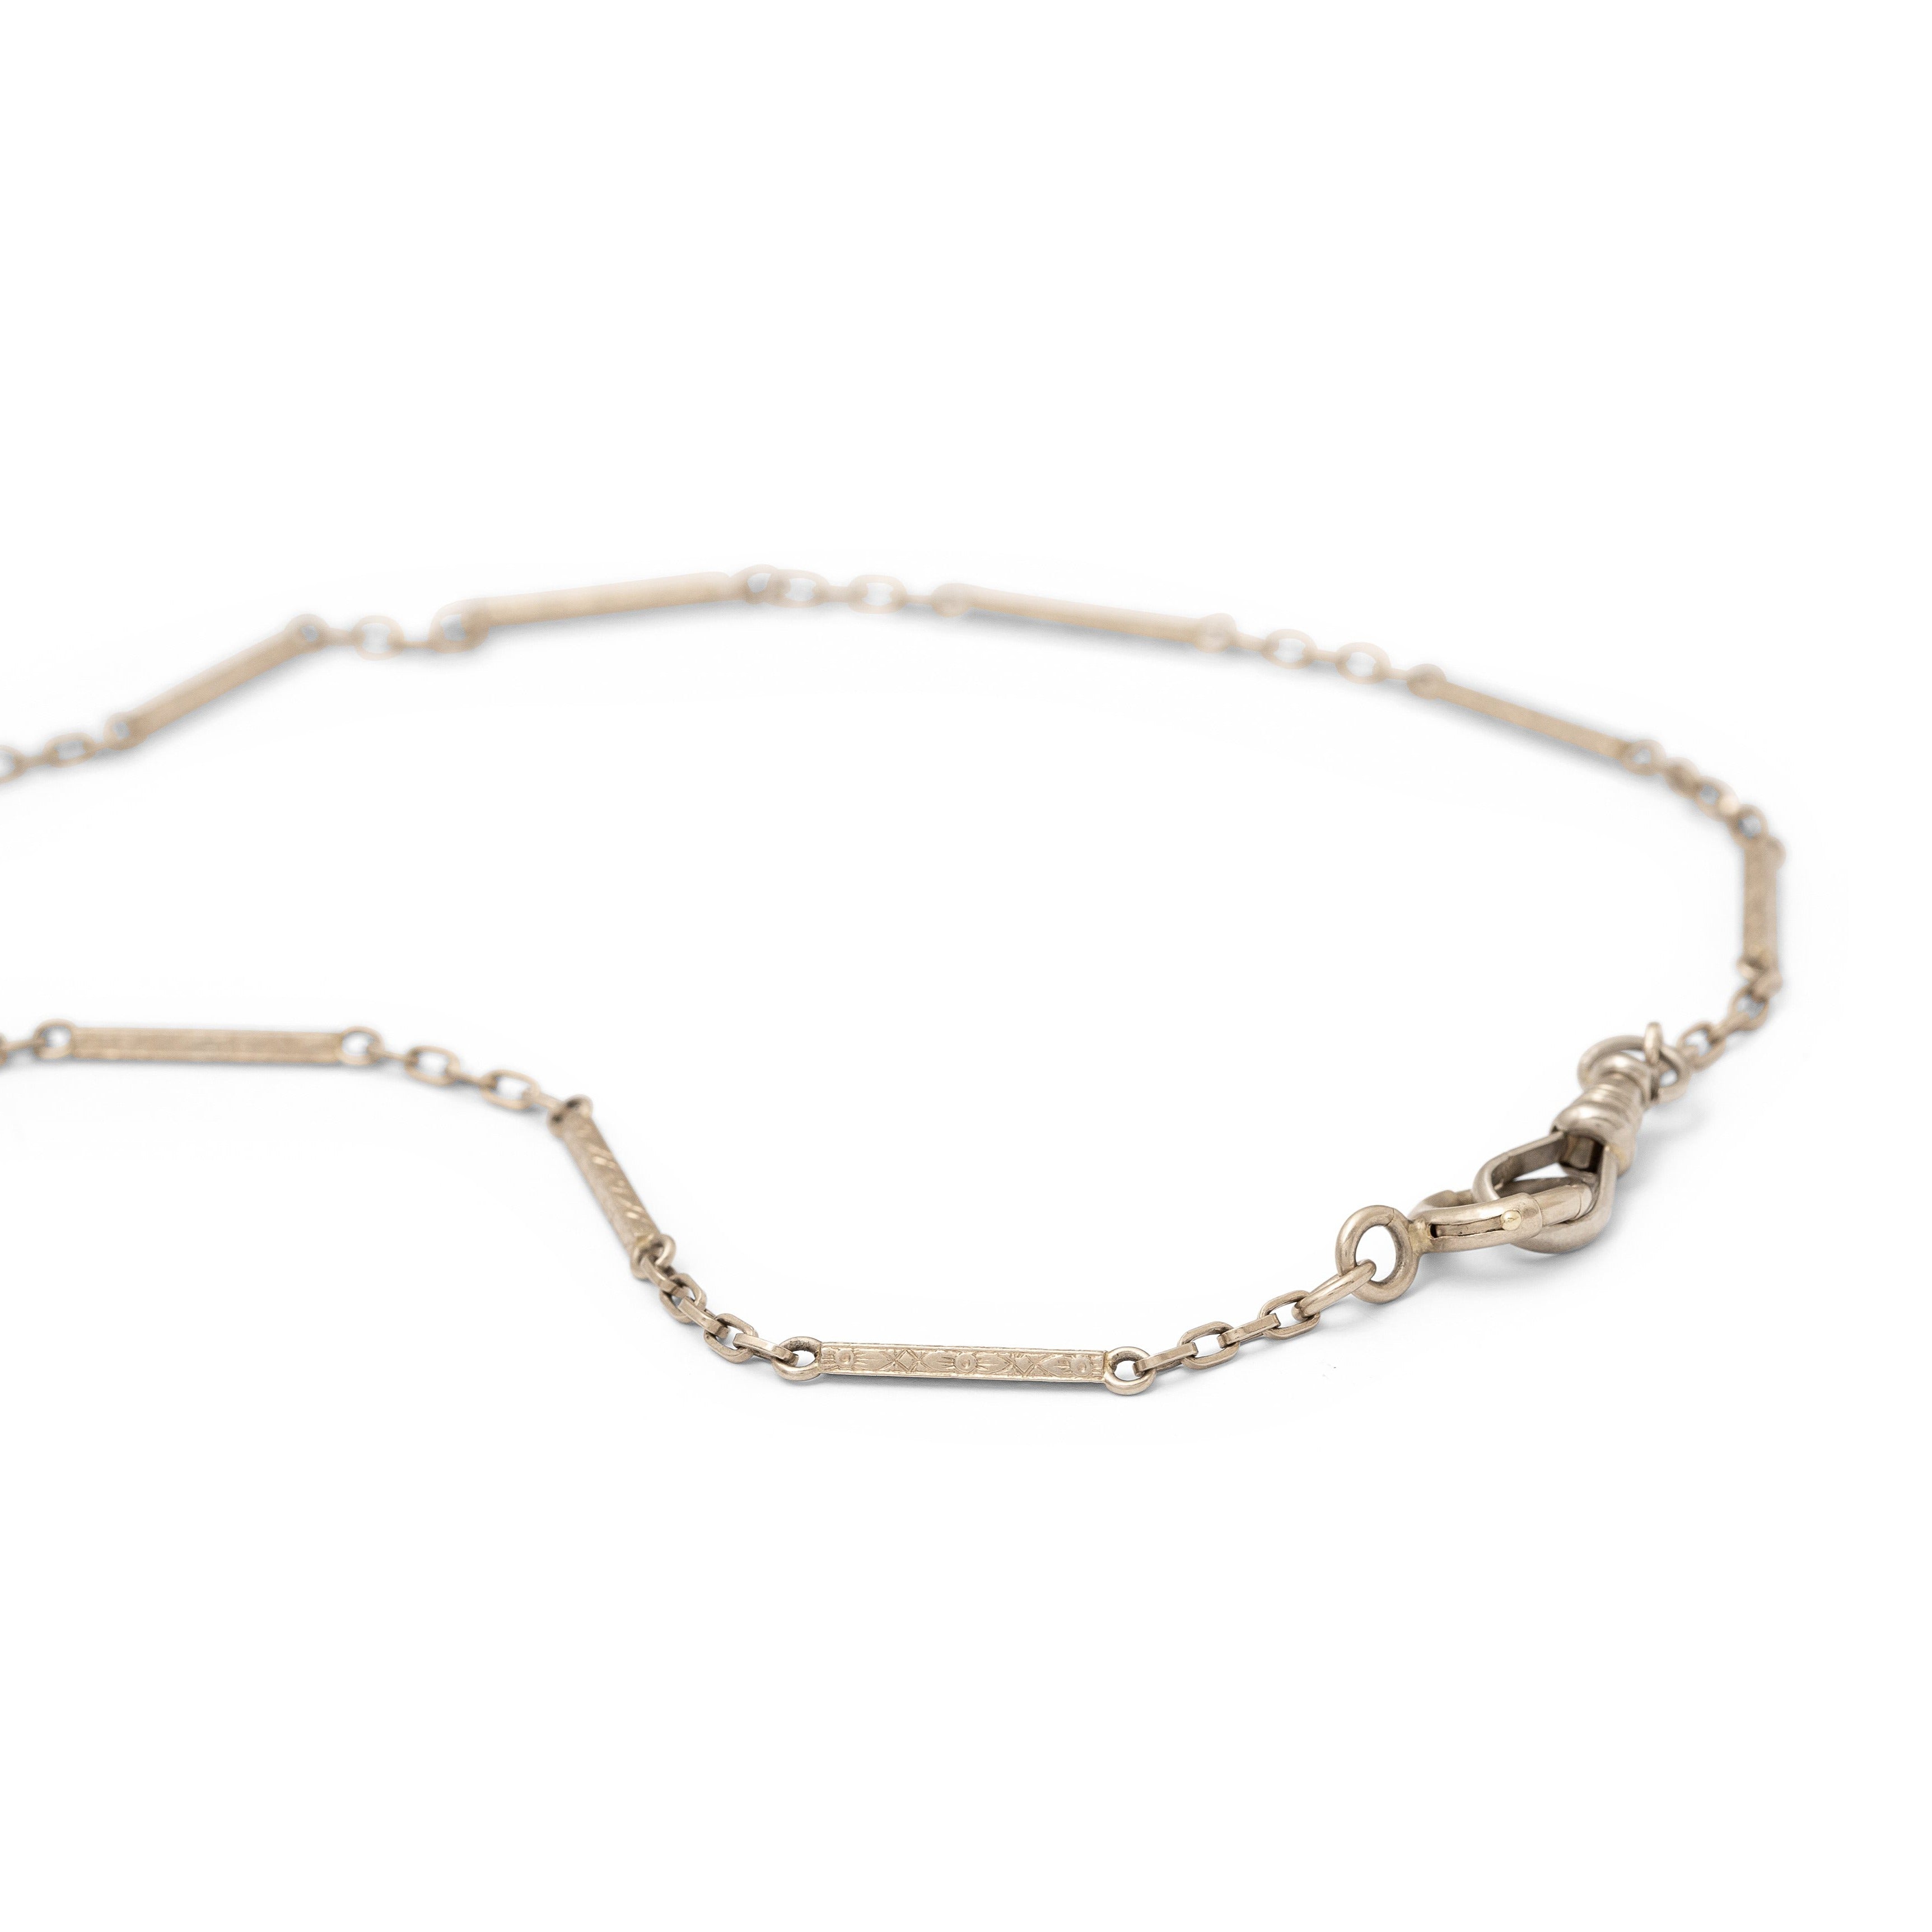 Bar and Link 10k White Gold 14" Choker Necklace